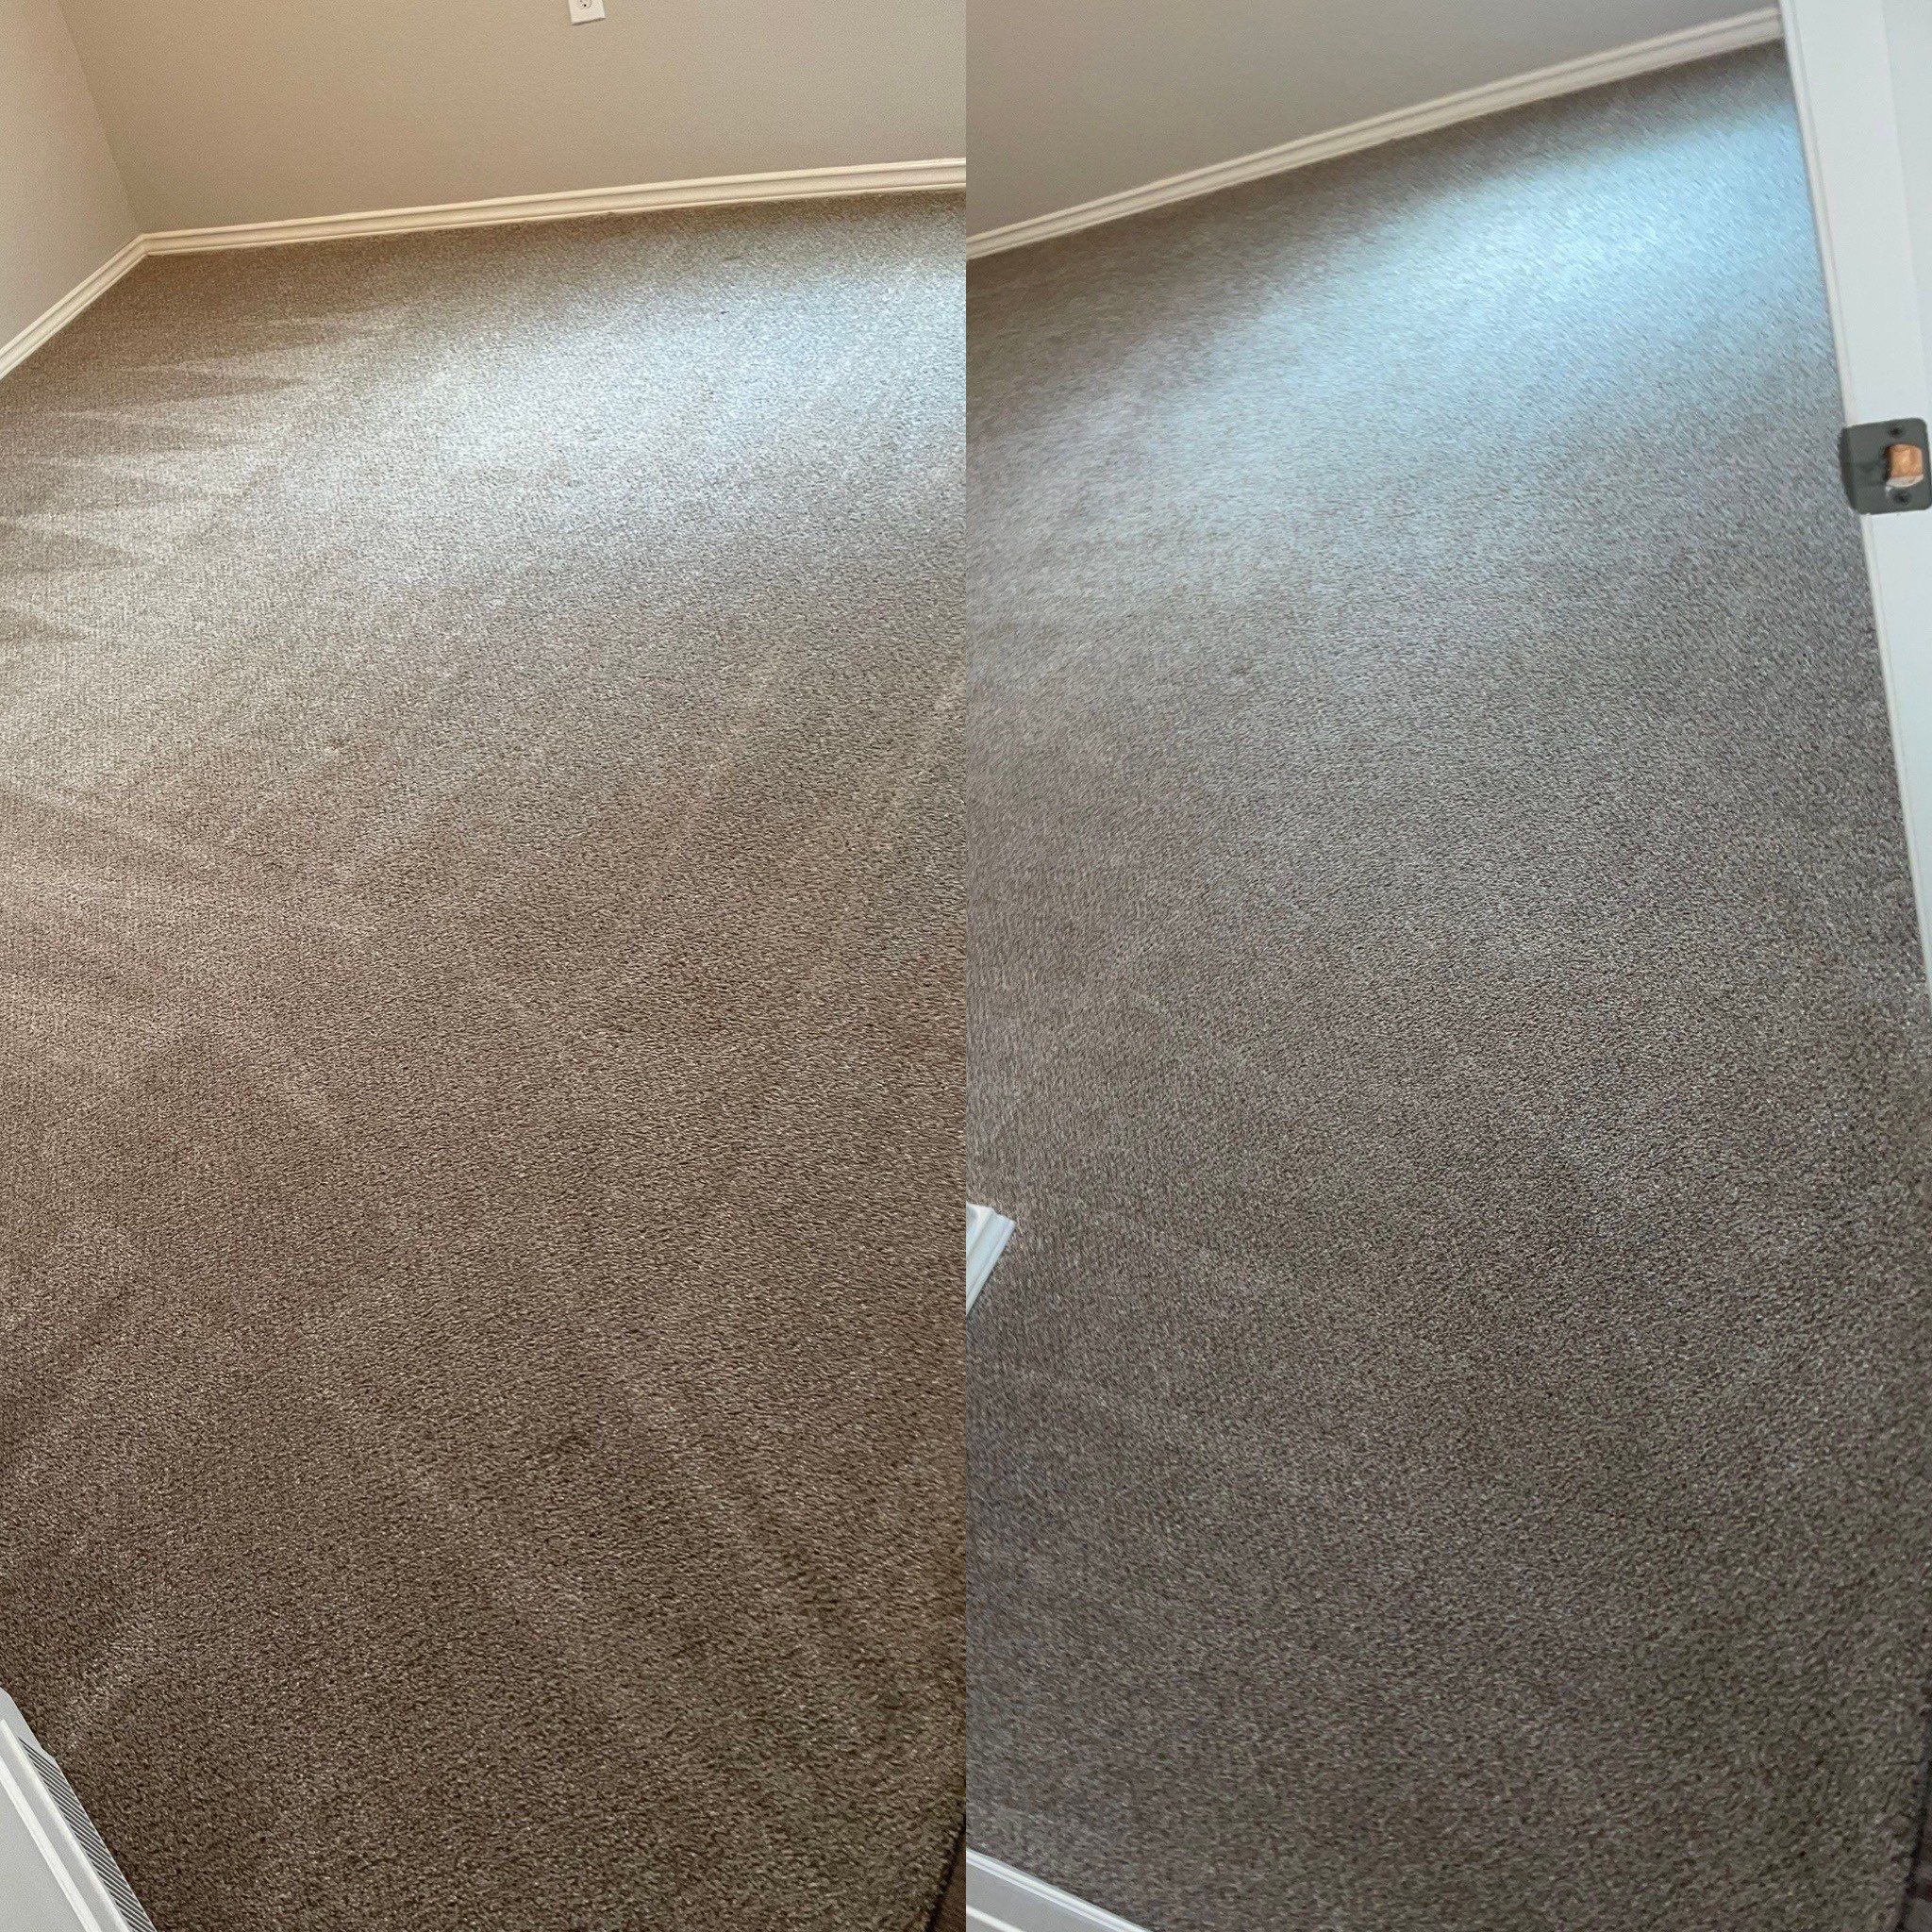 the carpet cleaning company is cleaning and restoring the carpet in a room making it look cleaner and refreshed